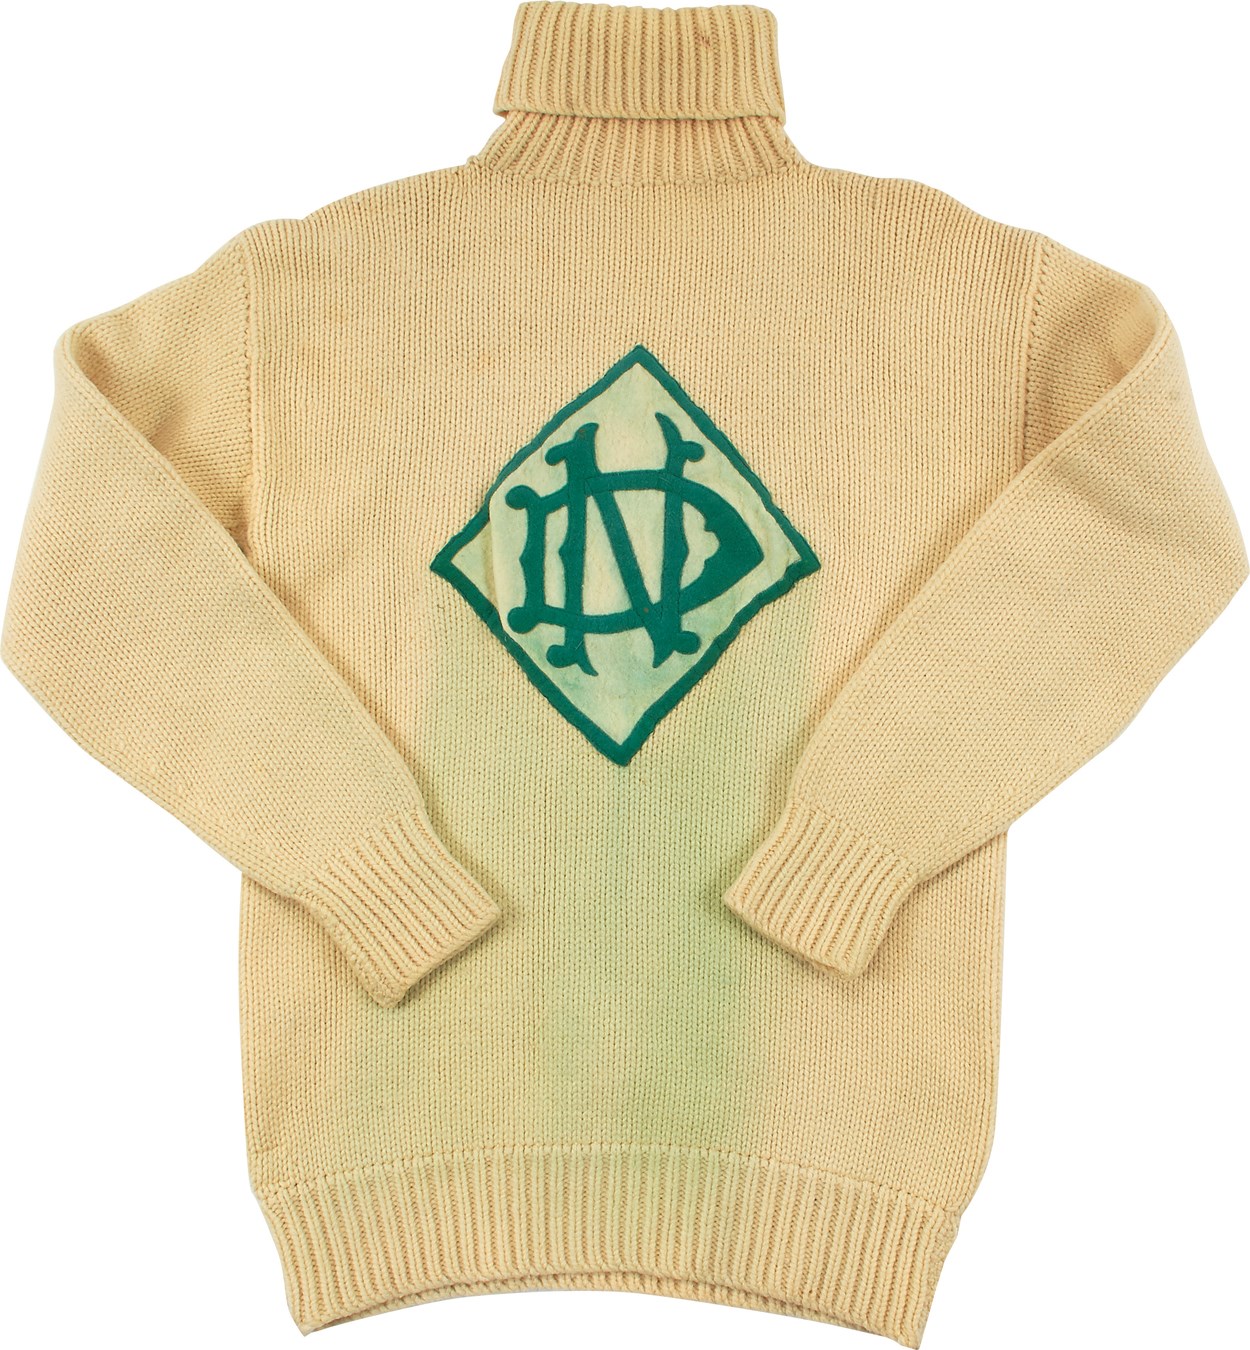 - Early Notre Dame Football Letterman's Sweater